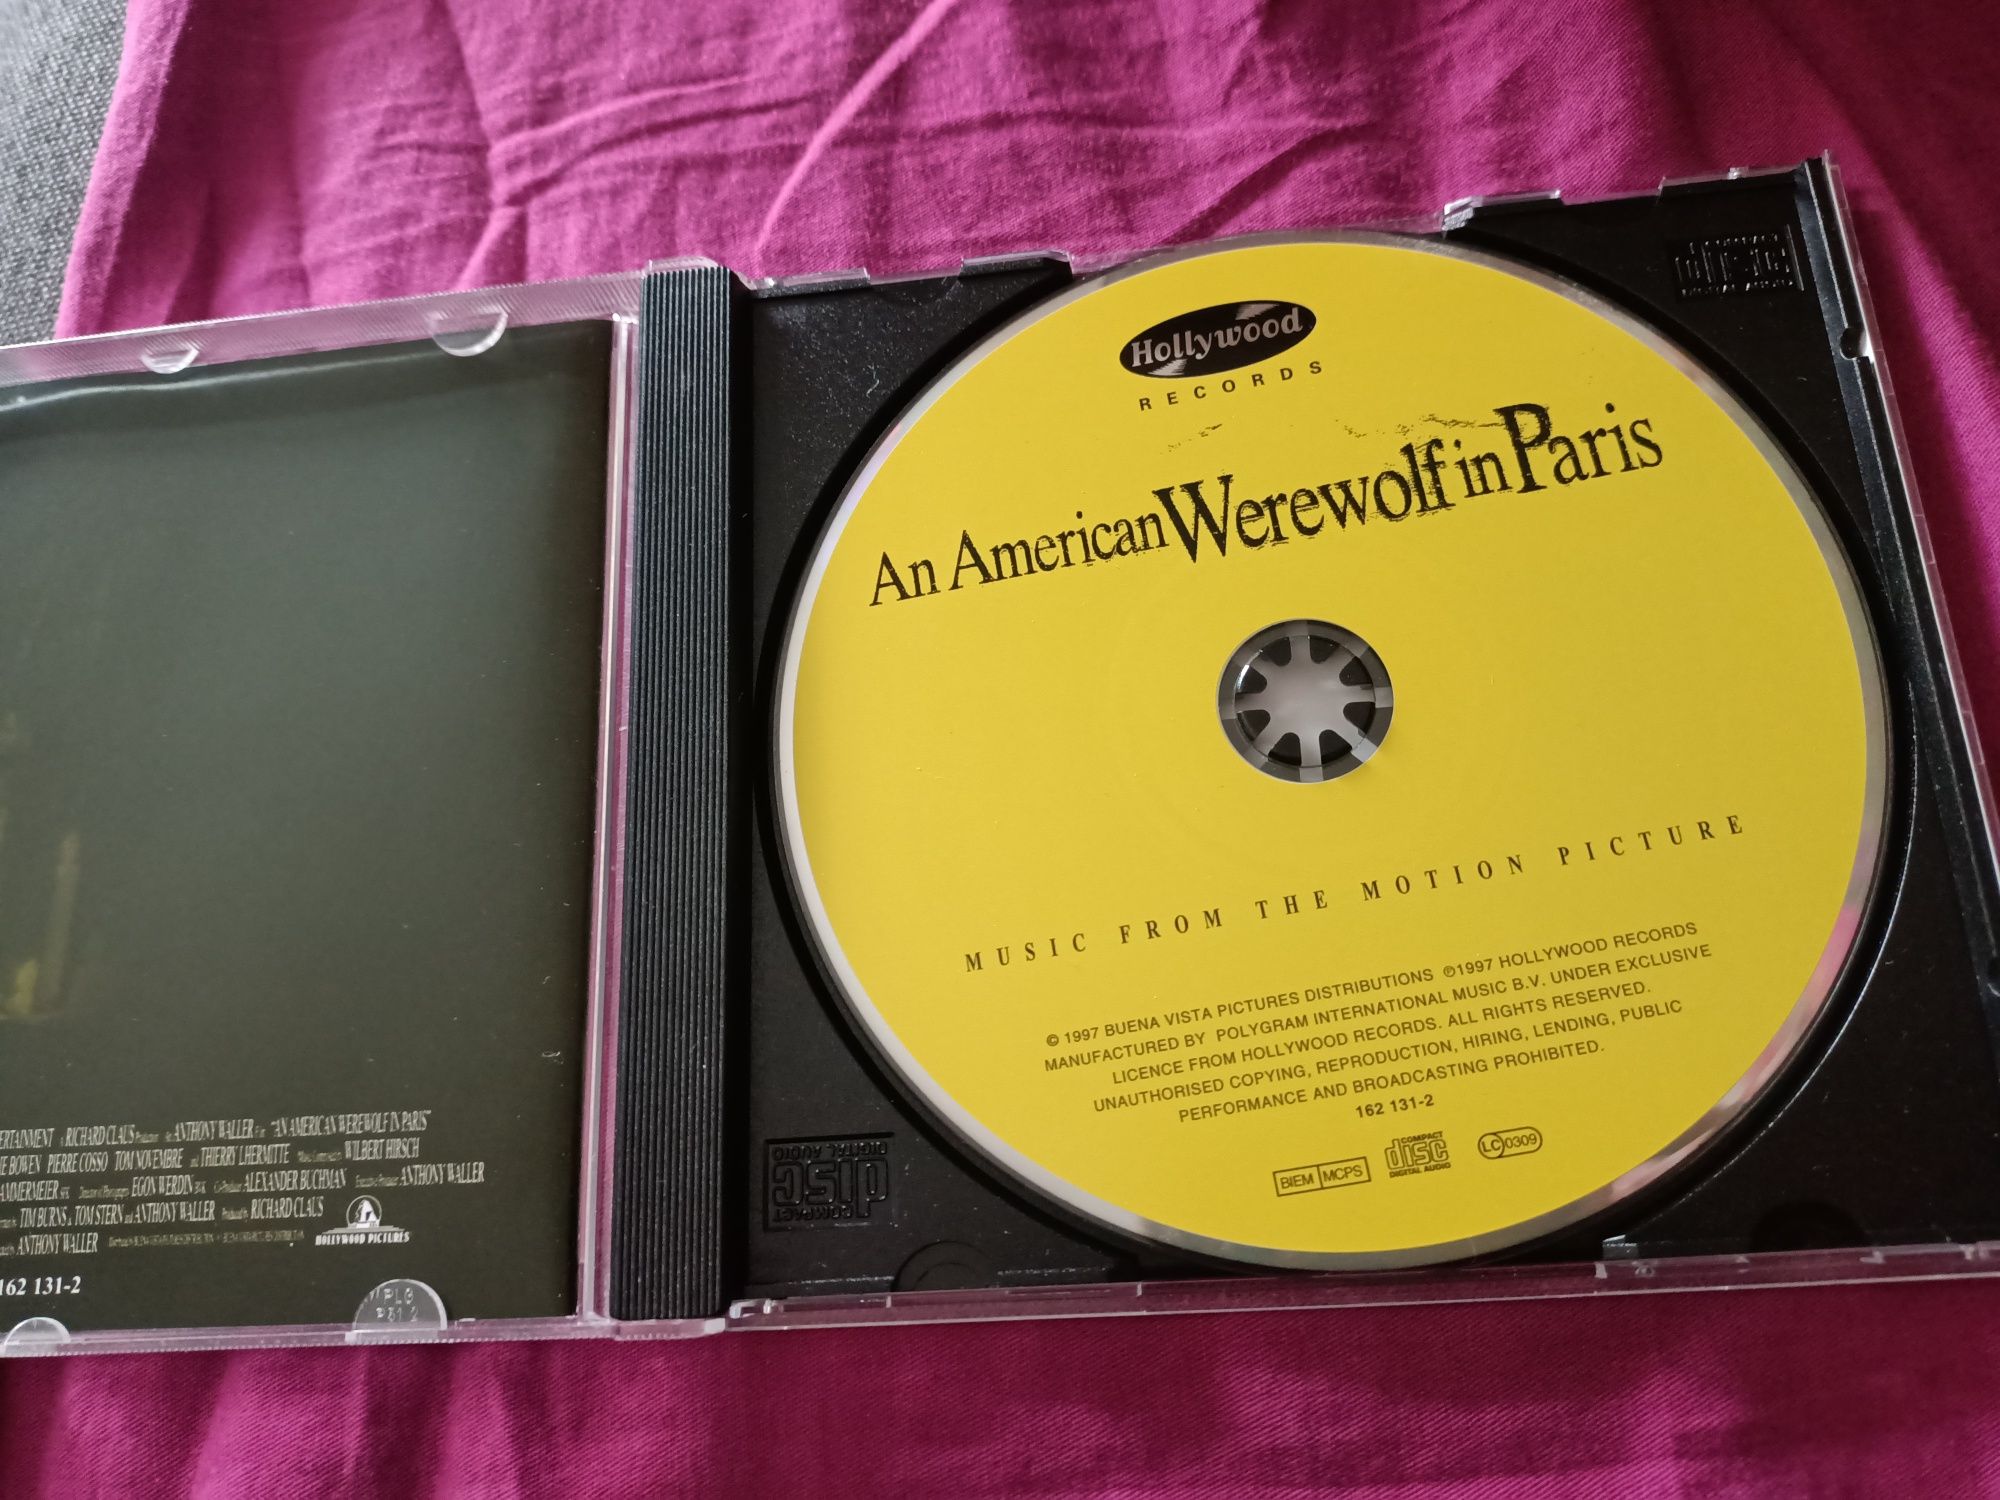 An American Werewolf In Paris - Music From The Motion Picture (vg+)